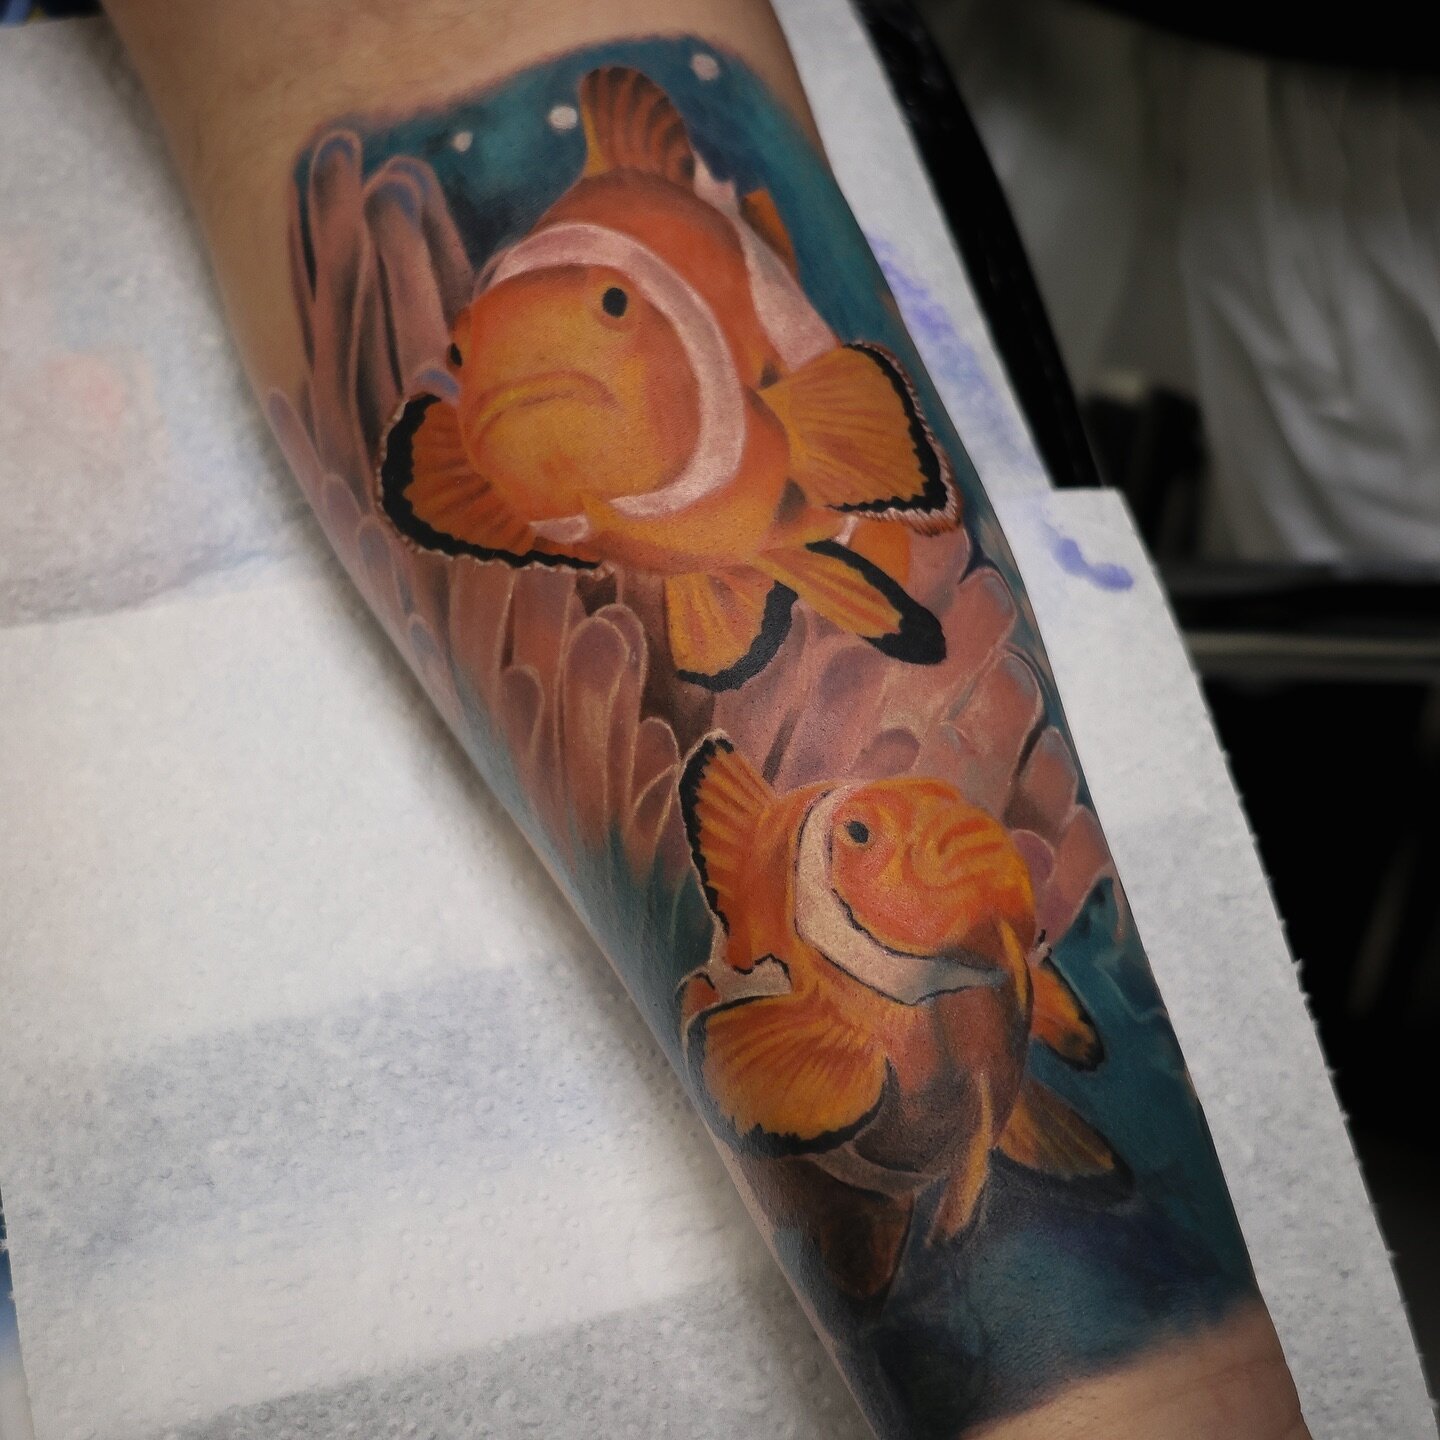 Can&rsquo;t believe my week at @tokyotattoo is nearly over already! Looking forward to tomorrows session! 

This piece was done over two days! Will carry this on in January! Will need to touch up the bottom part of the fish as it&rsquo;s a cover up :